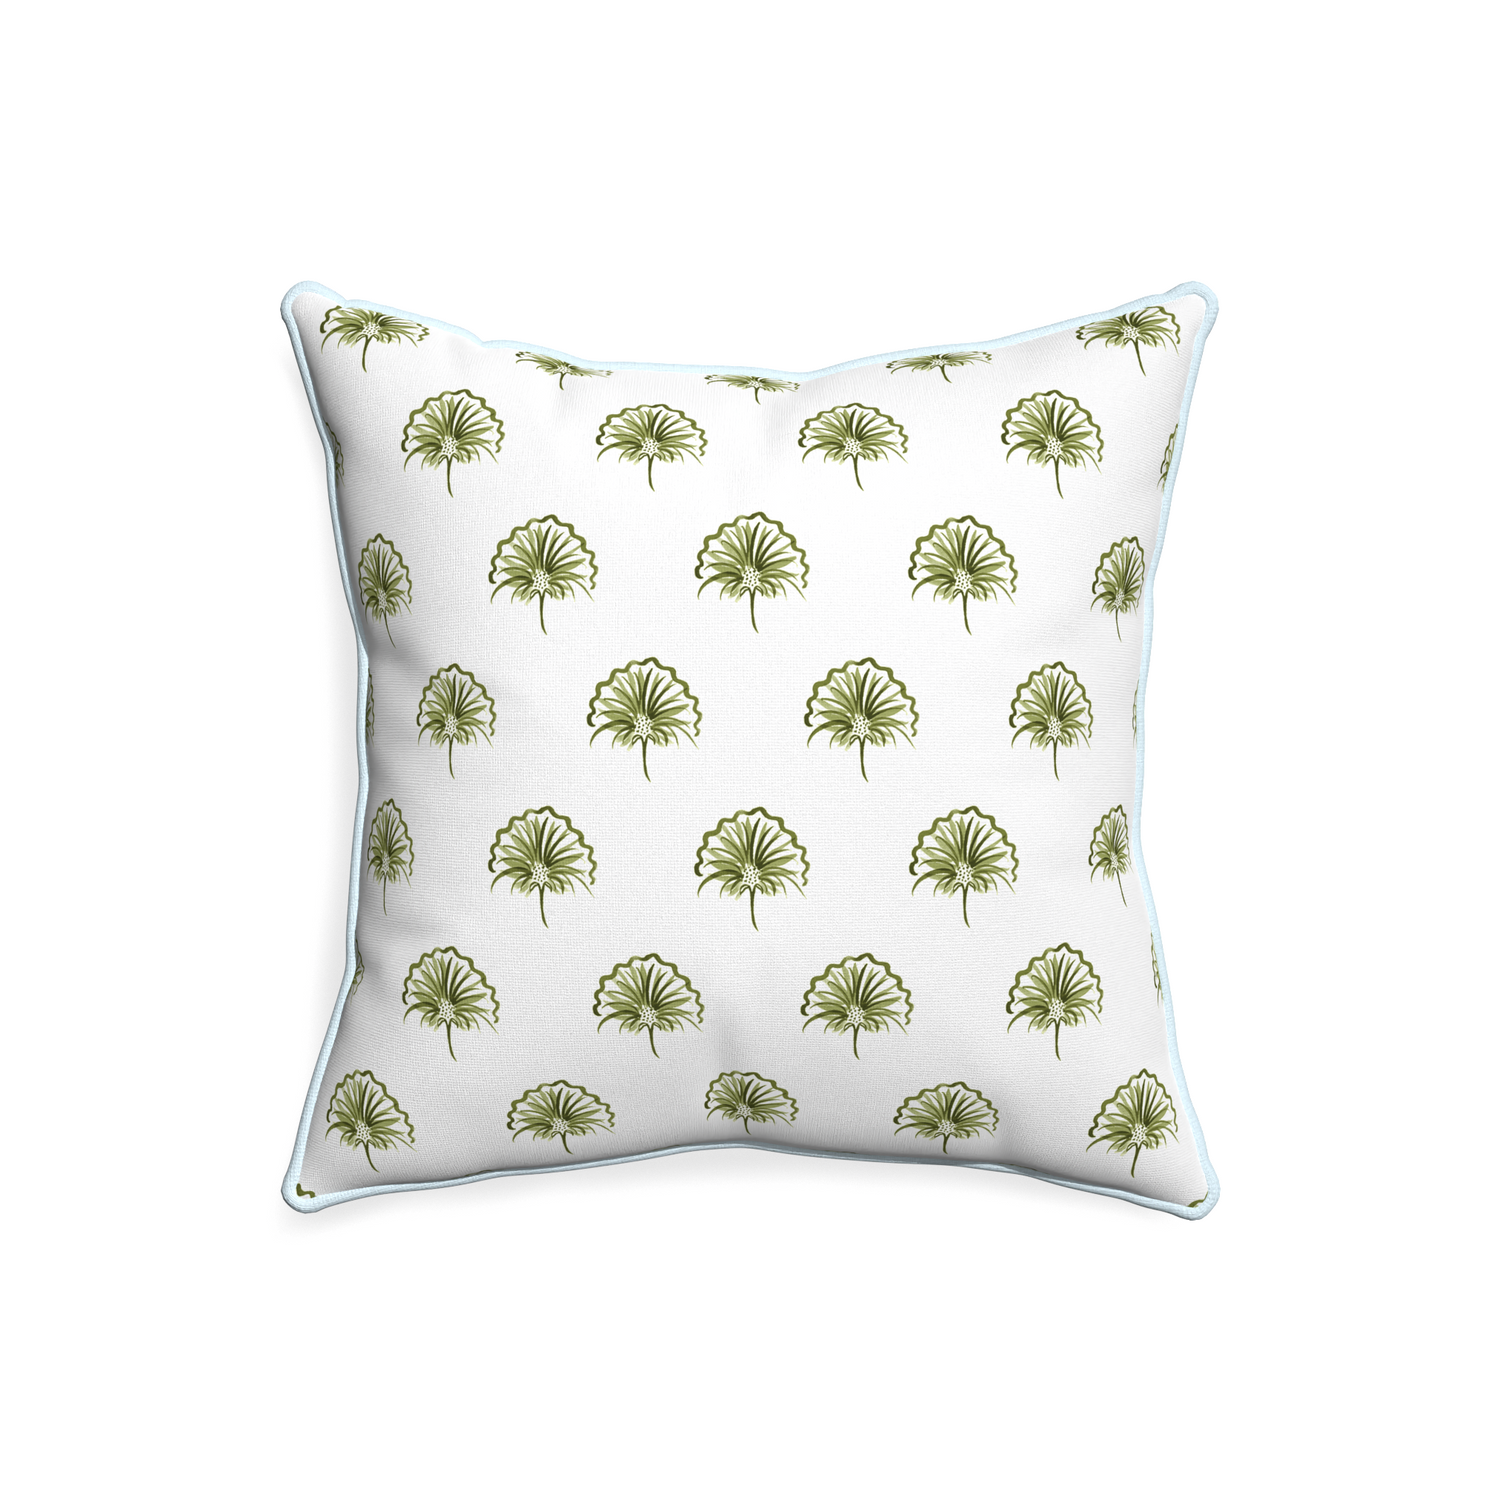 20-square penelope moss custom pillow with powder piping on white background